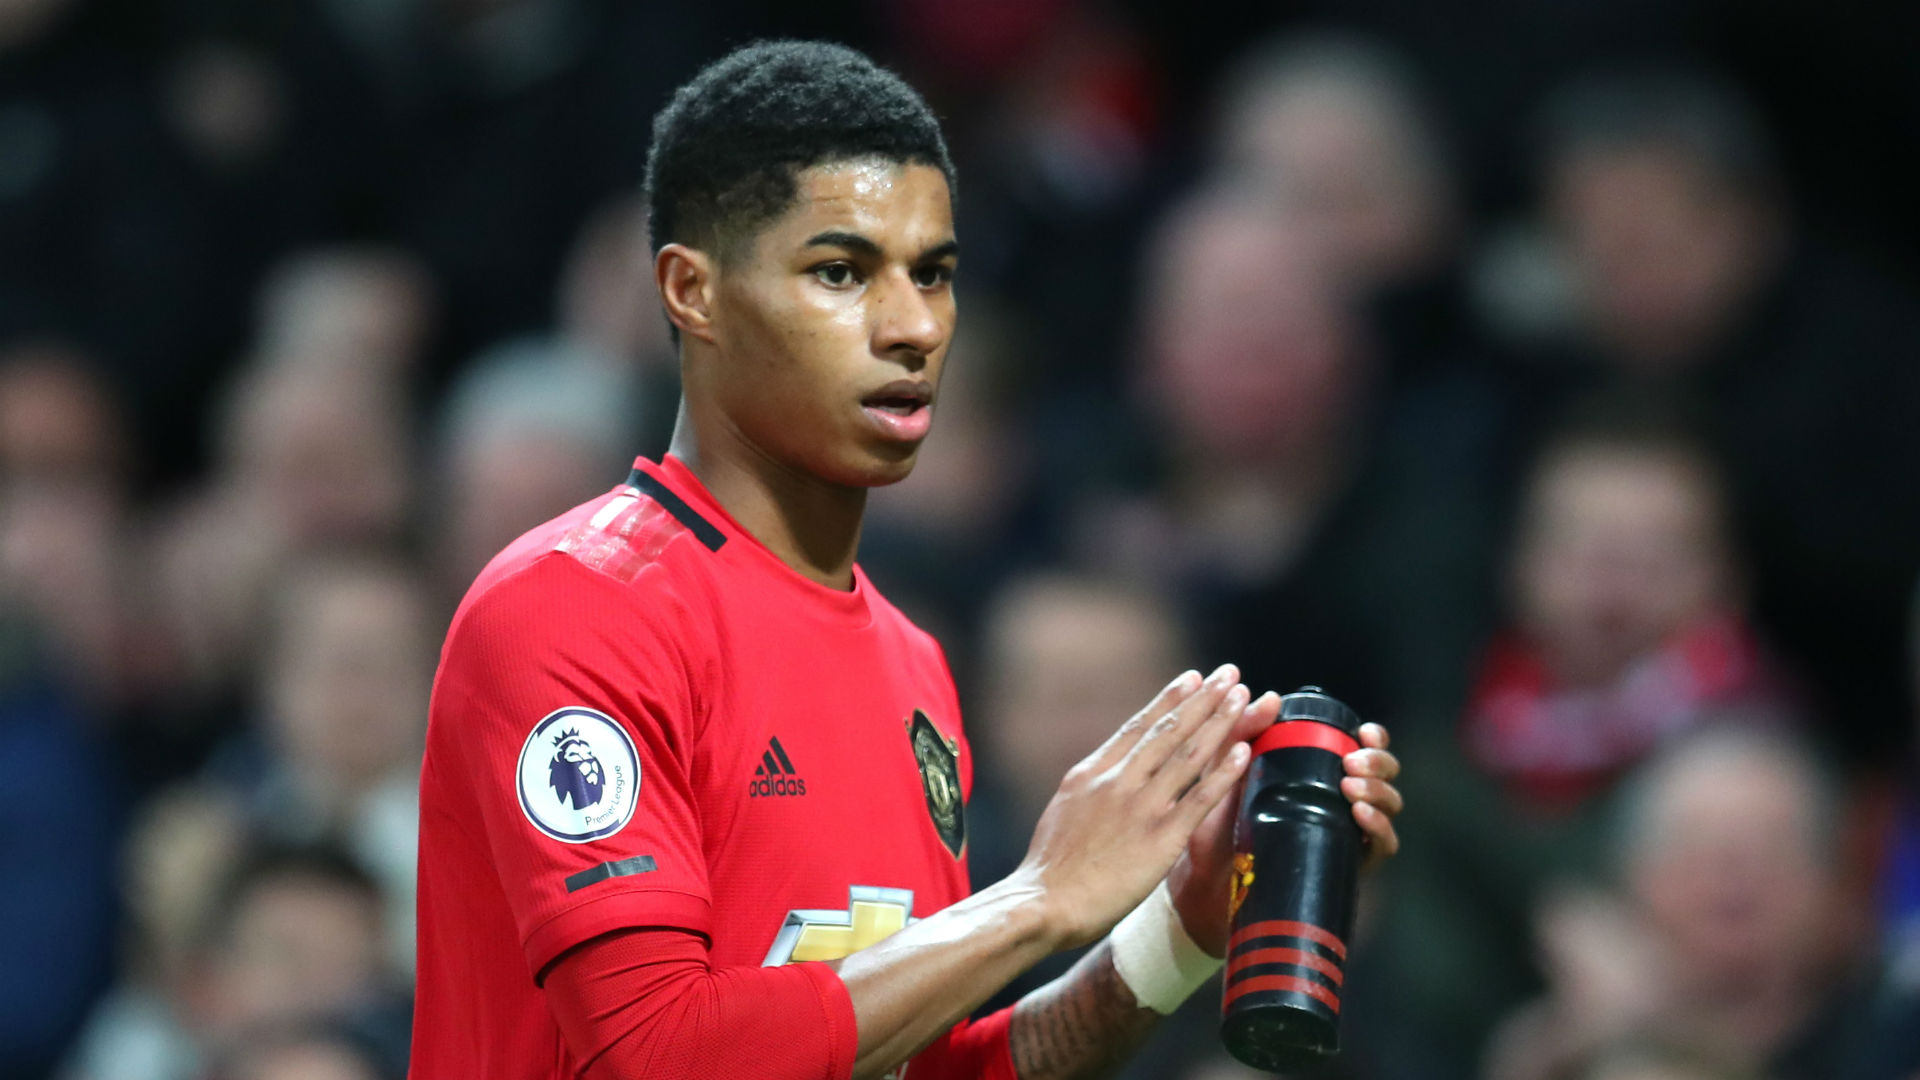 Players can now express themselves freer than before - Rashford